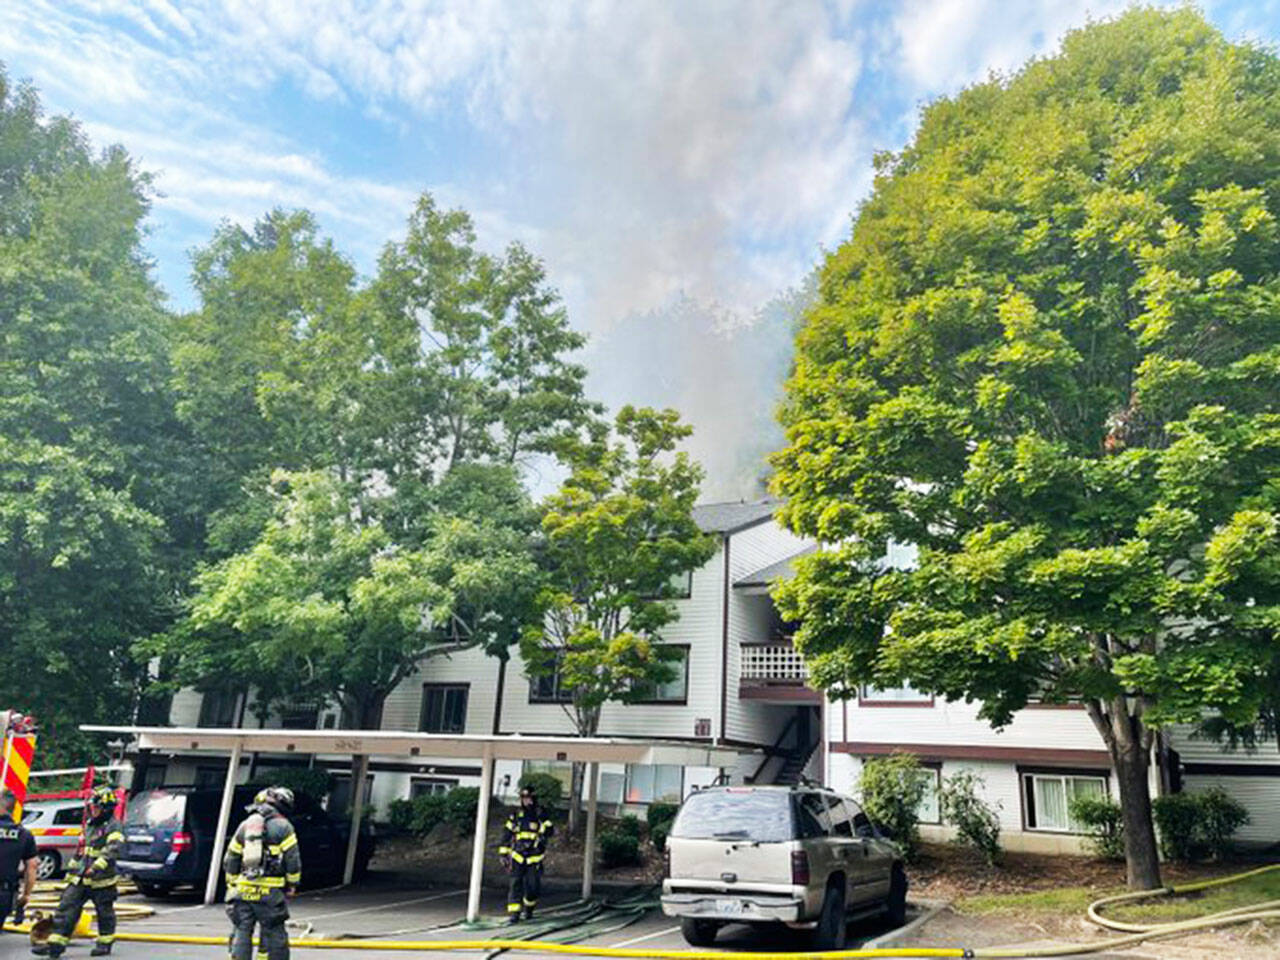 Twenty people were displaced after a fire Aug. 26 at the Berkeley Heights Apartments in Kent. COURTESY PHOTO, Puget Sound Fire